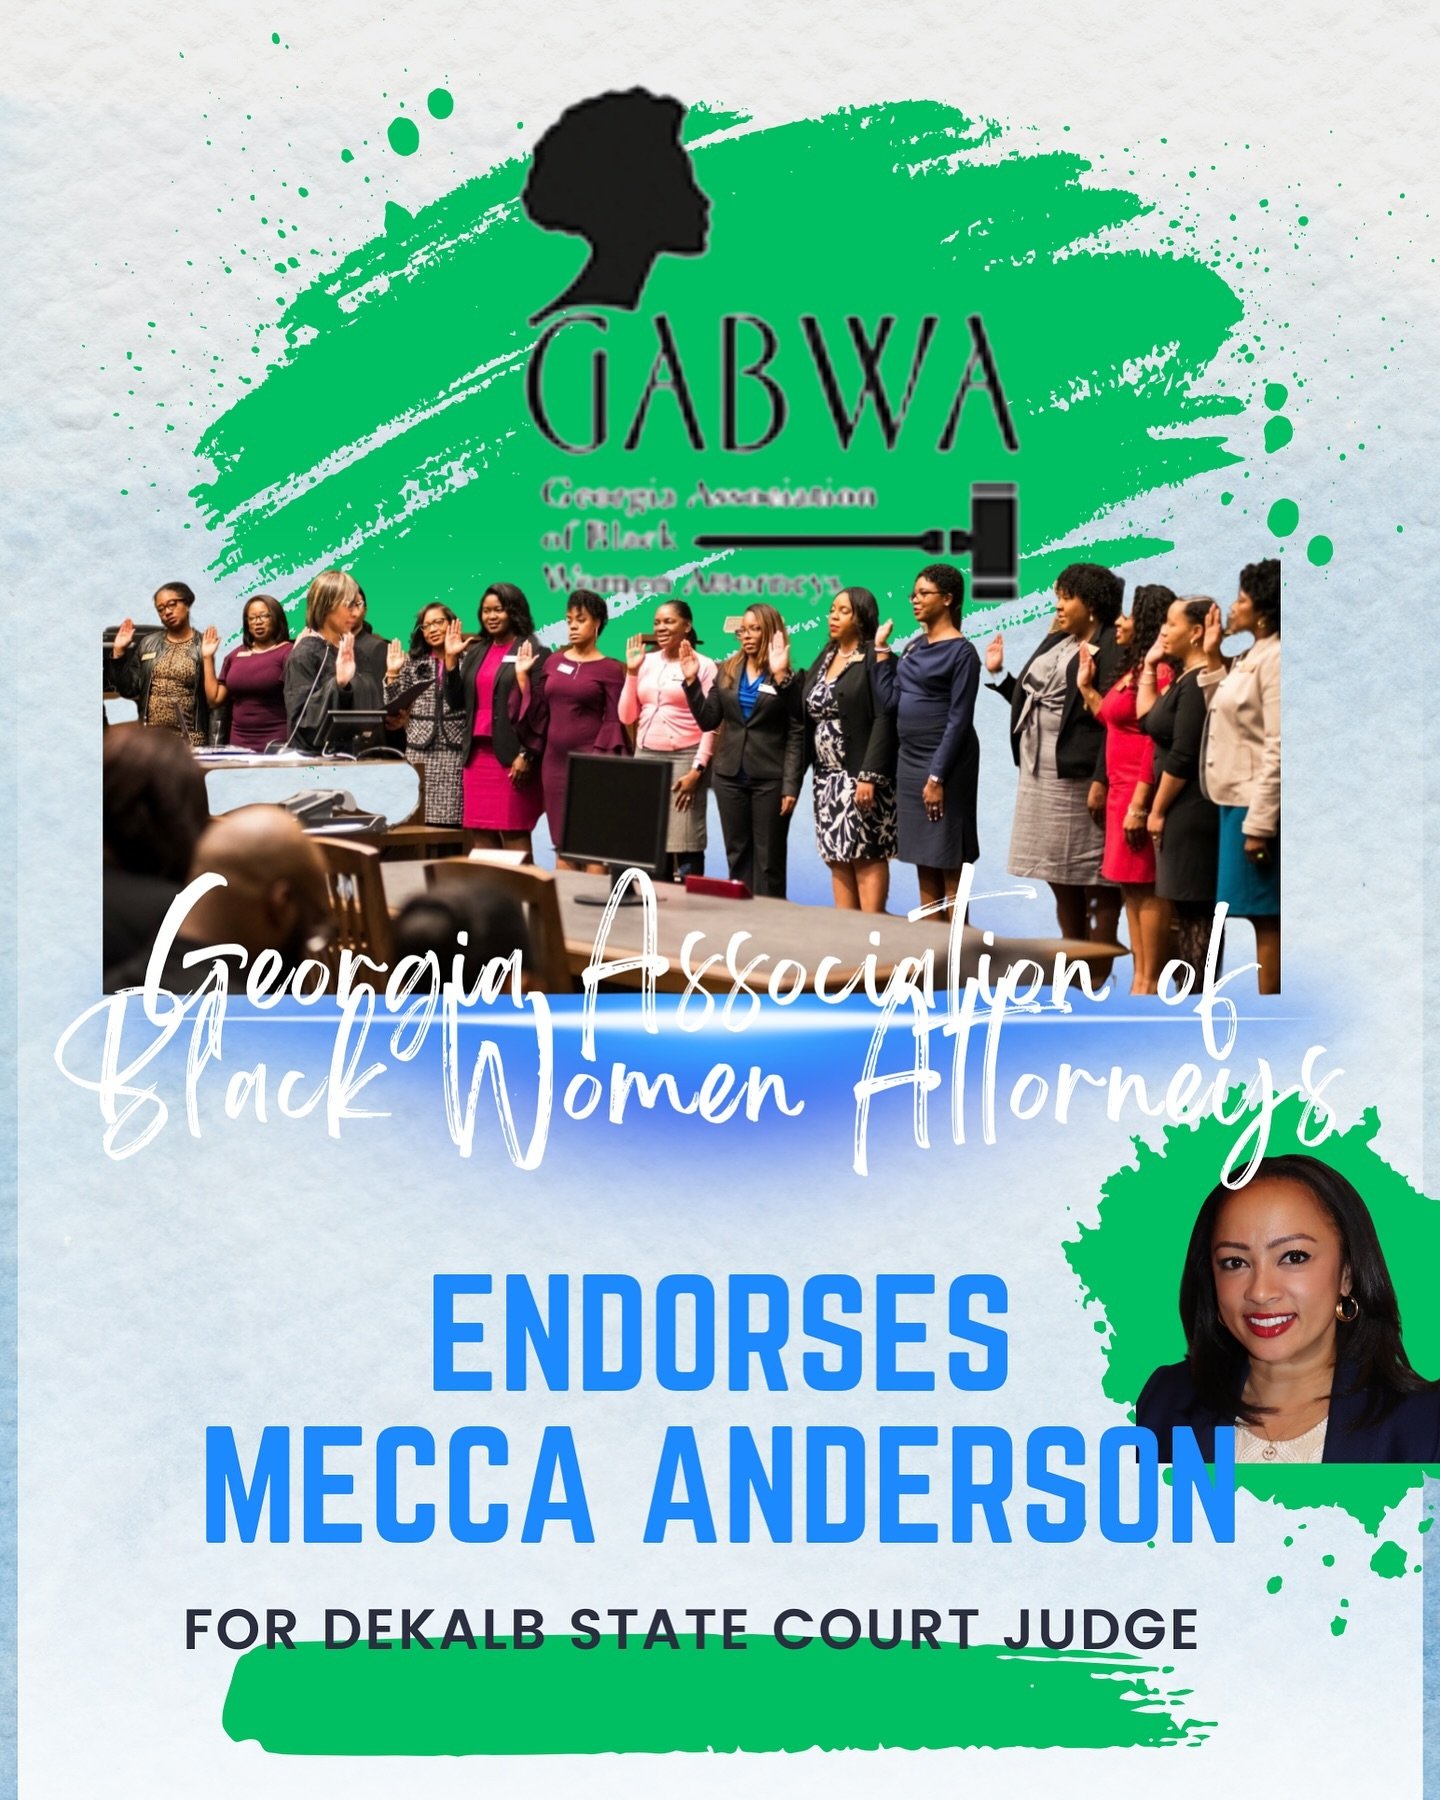 Thrilled and honored to announce that I have been endorsed by The Georgia Association of Black Women Attorney&rsquo;s (GABWA). Founded in 1981, GABWA is a powerful organization dedicated to increasing black female representation in the judiciary and 